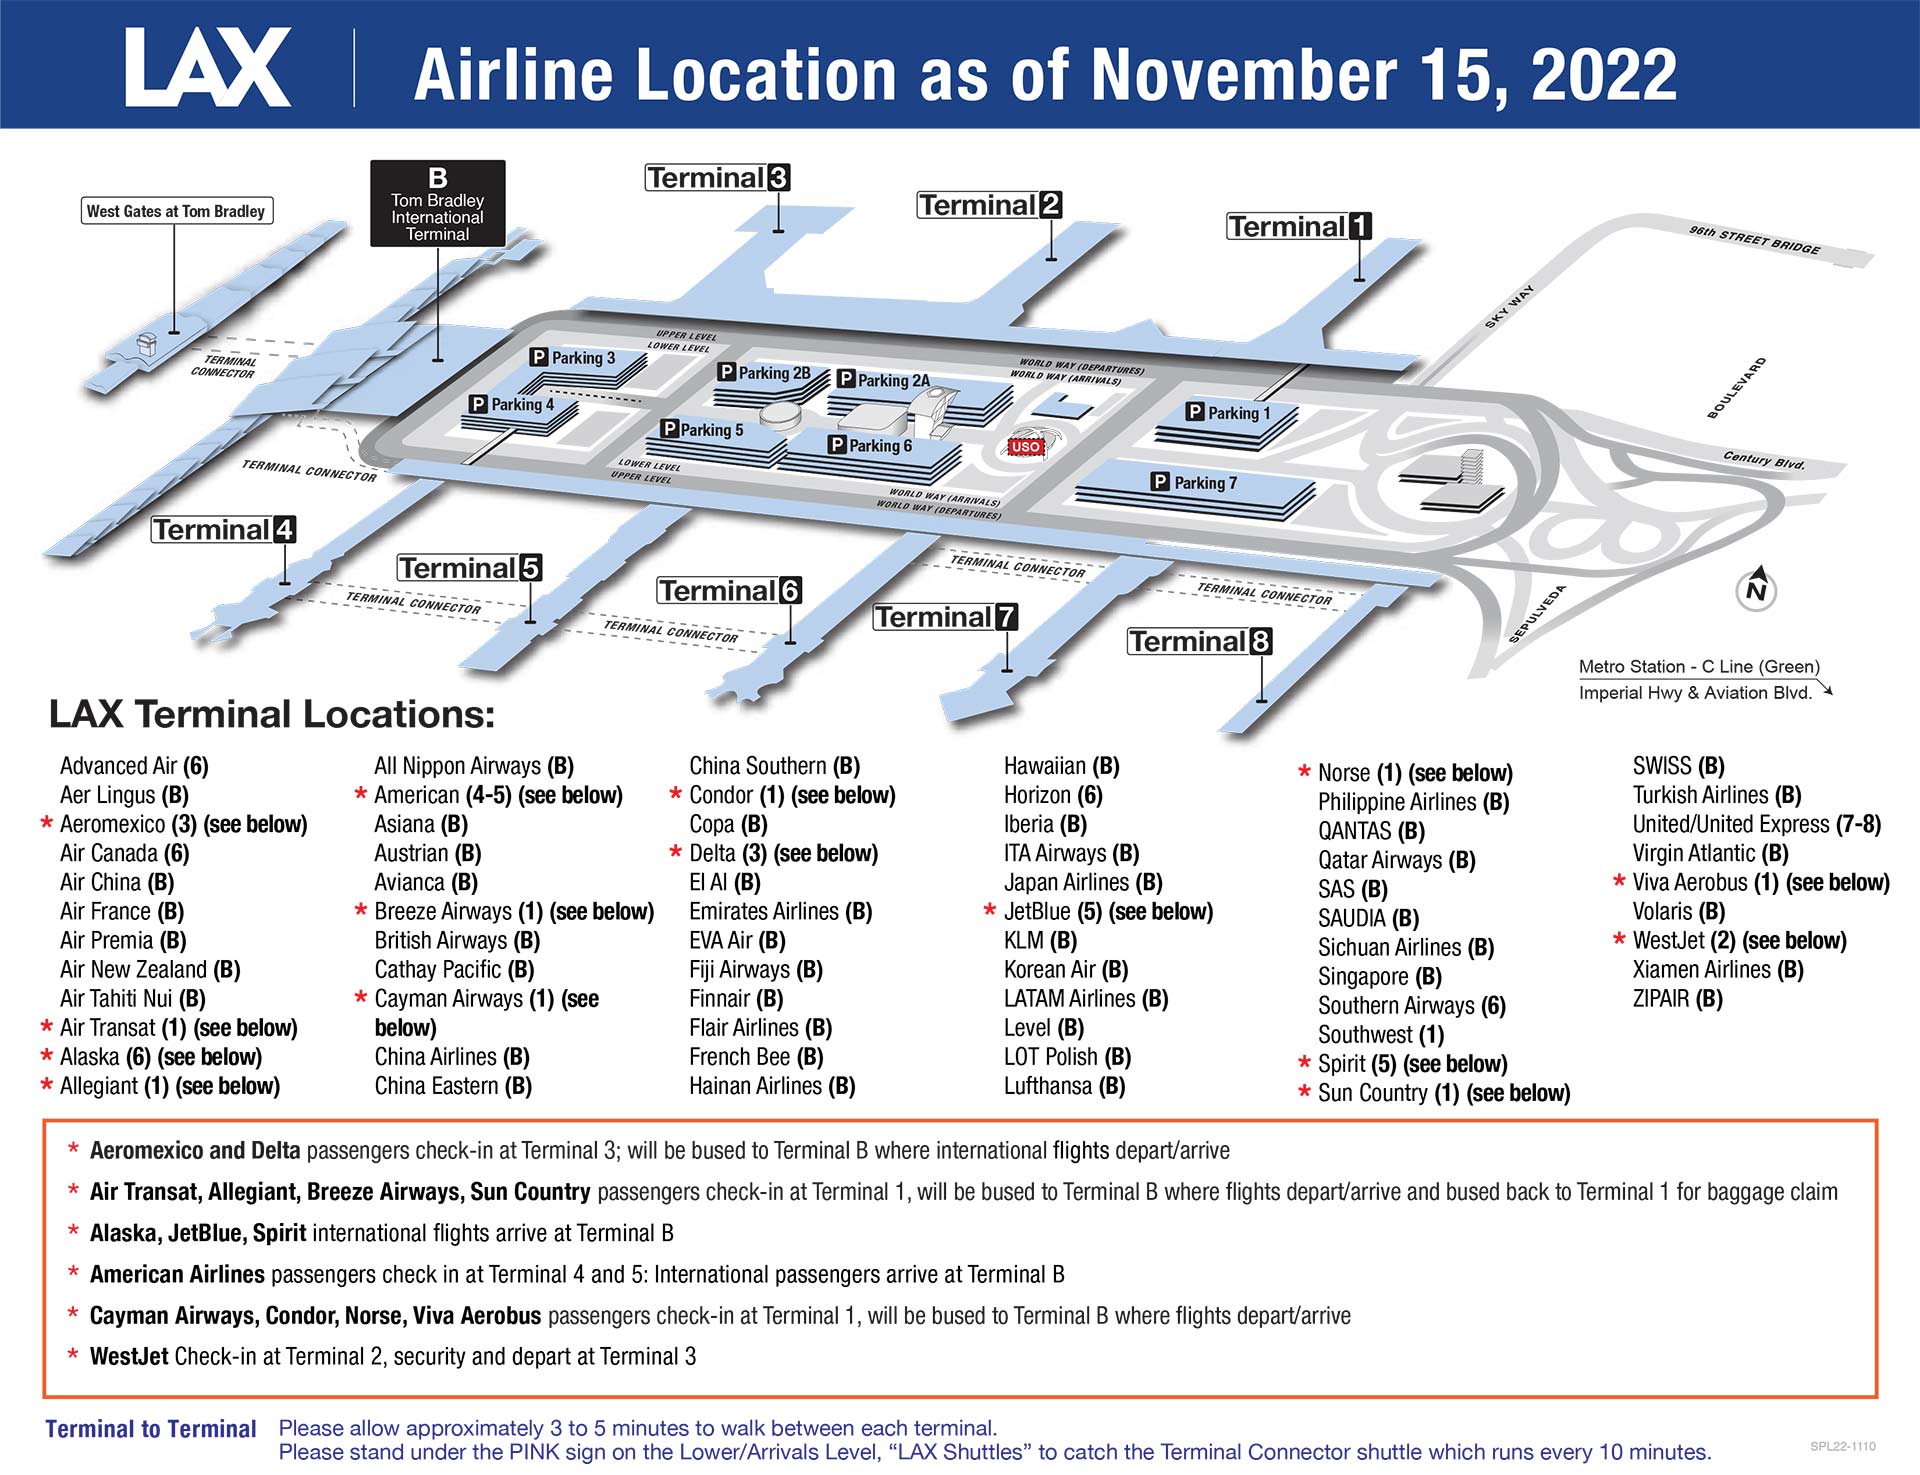 LAX Airline Locations